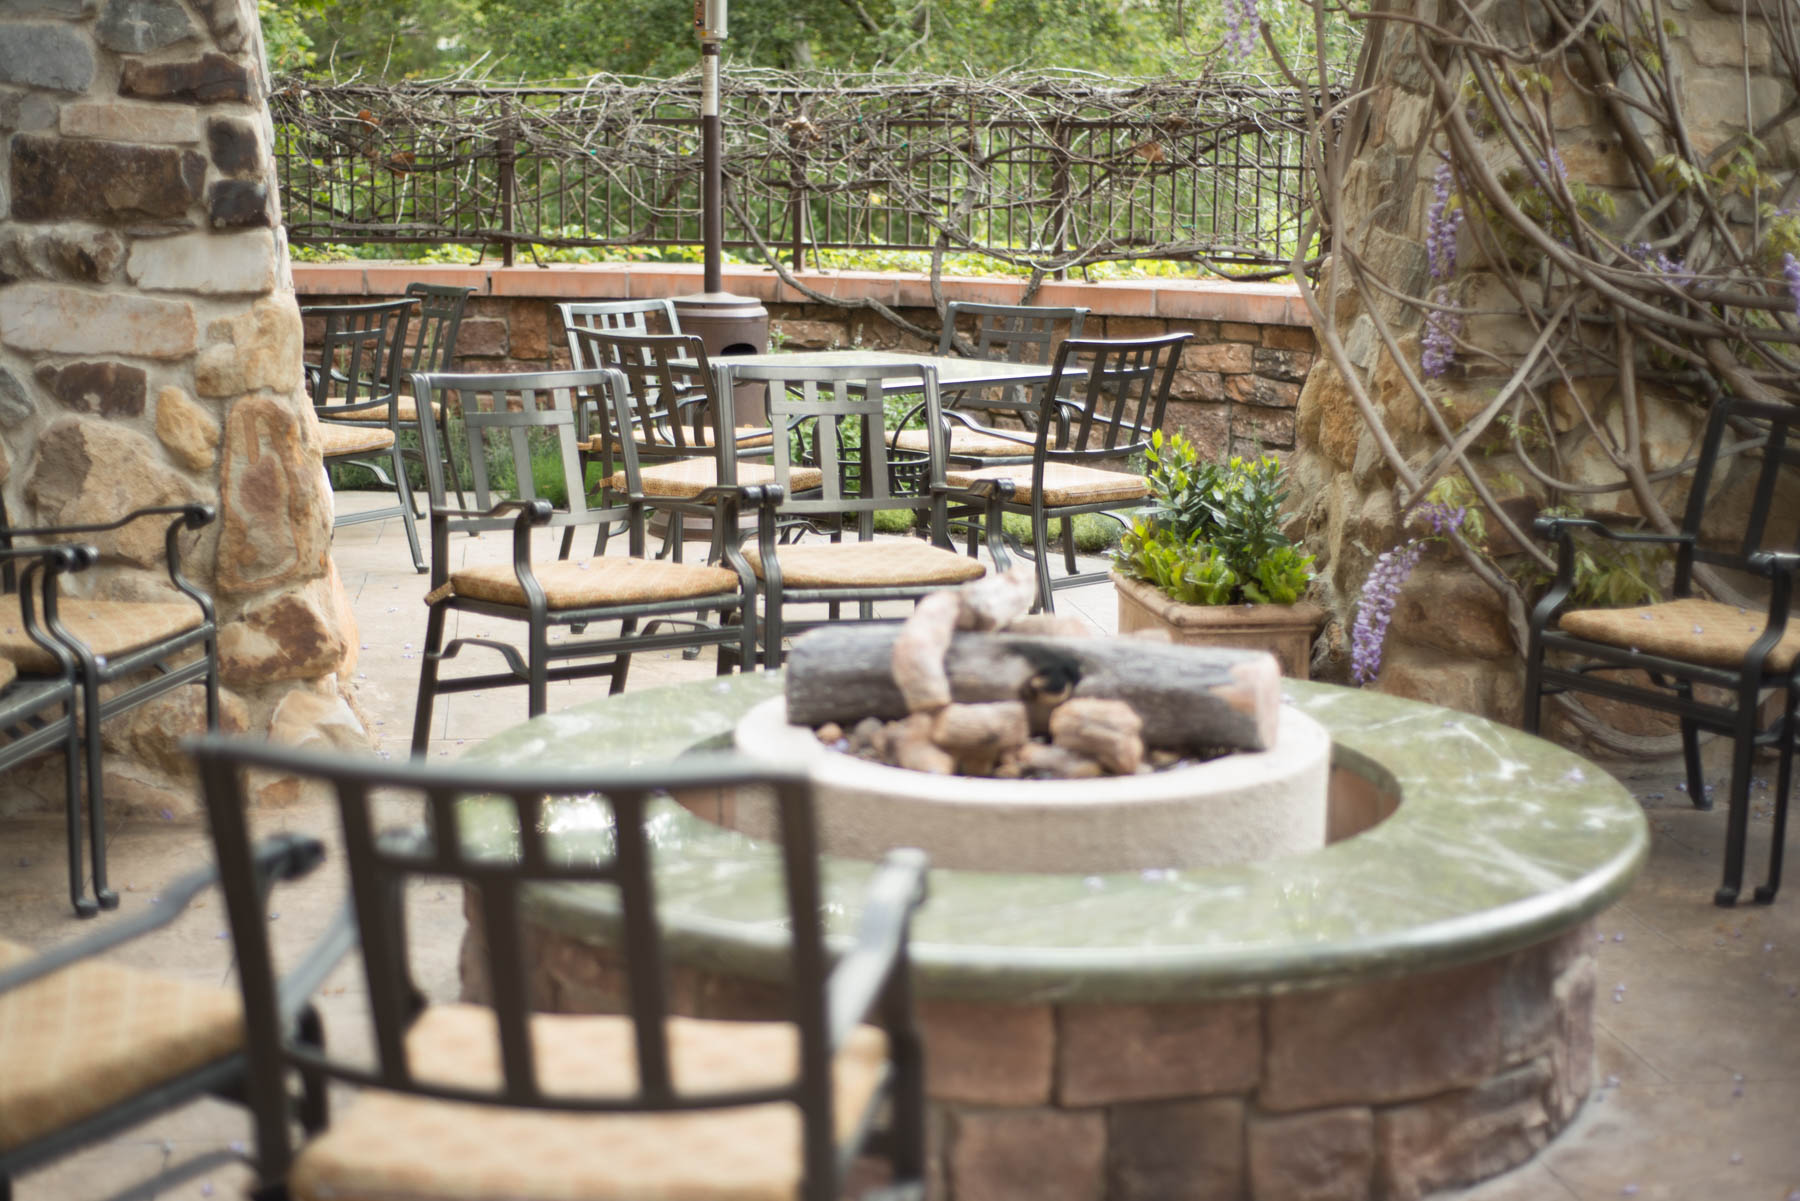 Napa Rose Restaurant Outside Patio and Fire Pits - Disneyland Hotel Activities for Adults